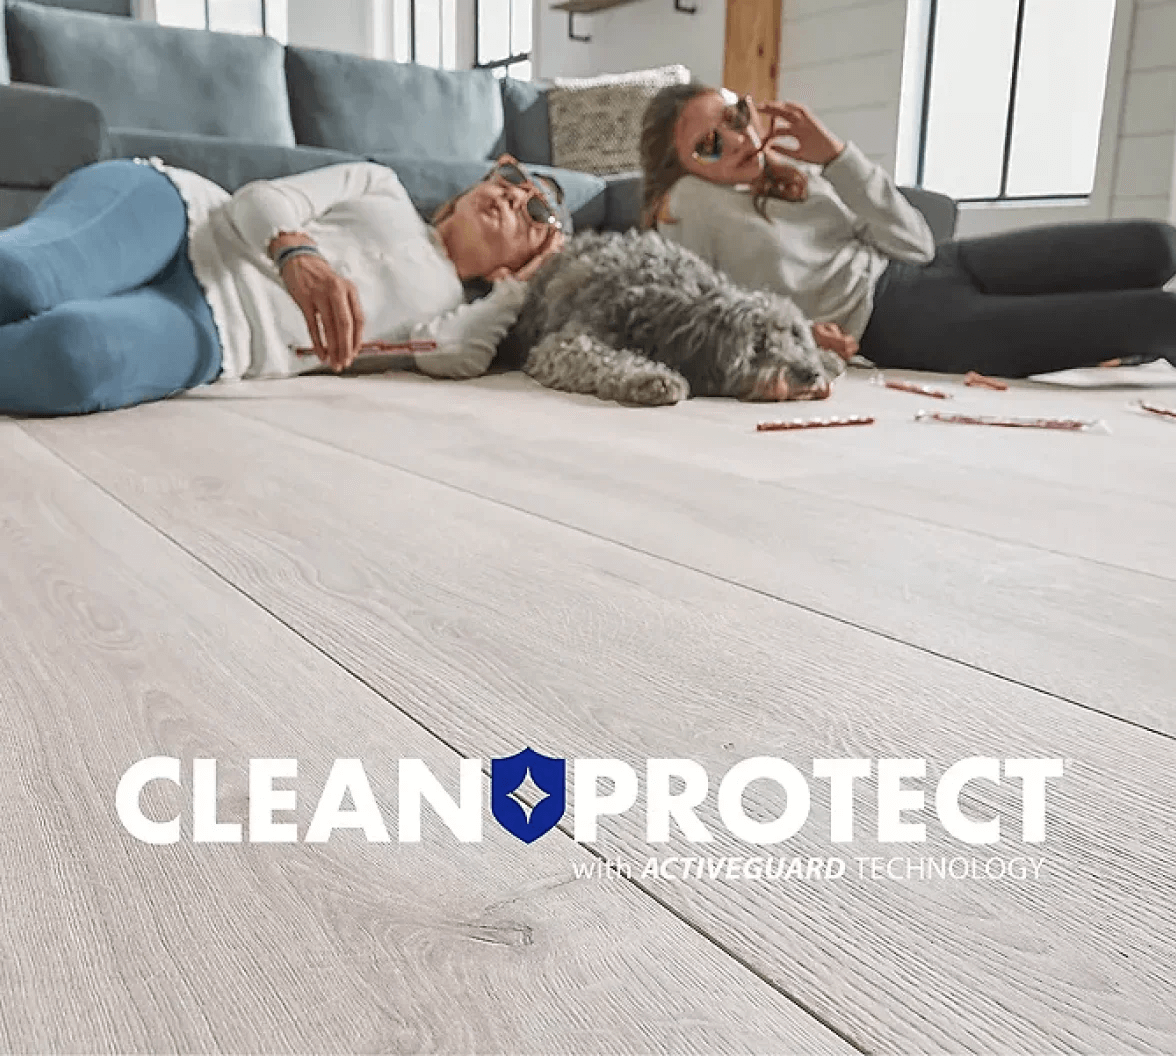 Clean protect | Henson's Greater Tennessee Flooring